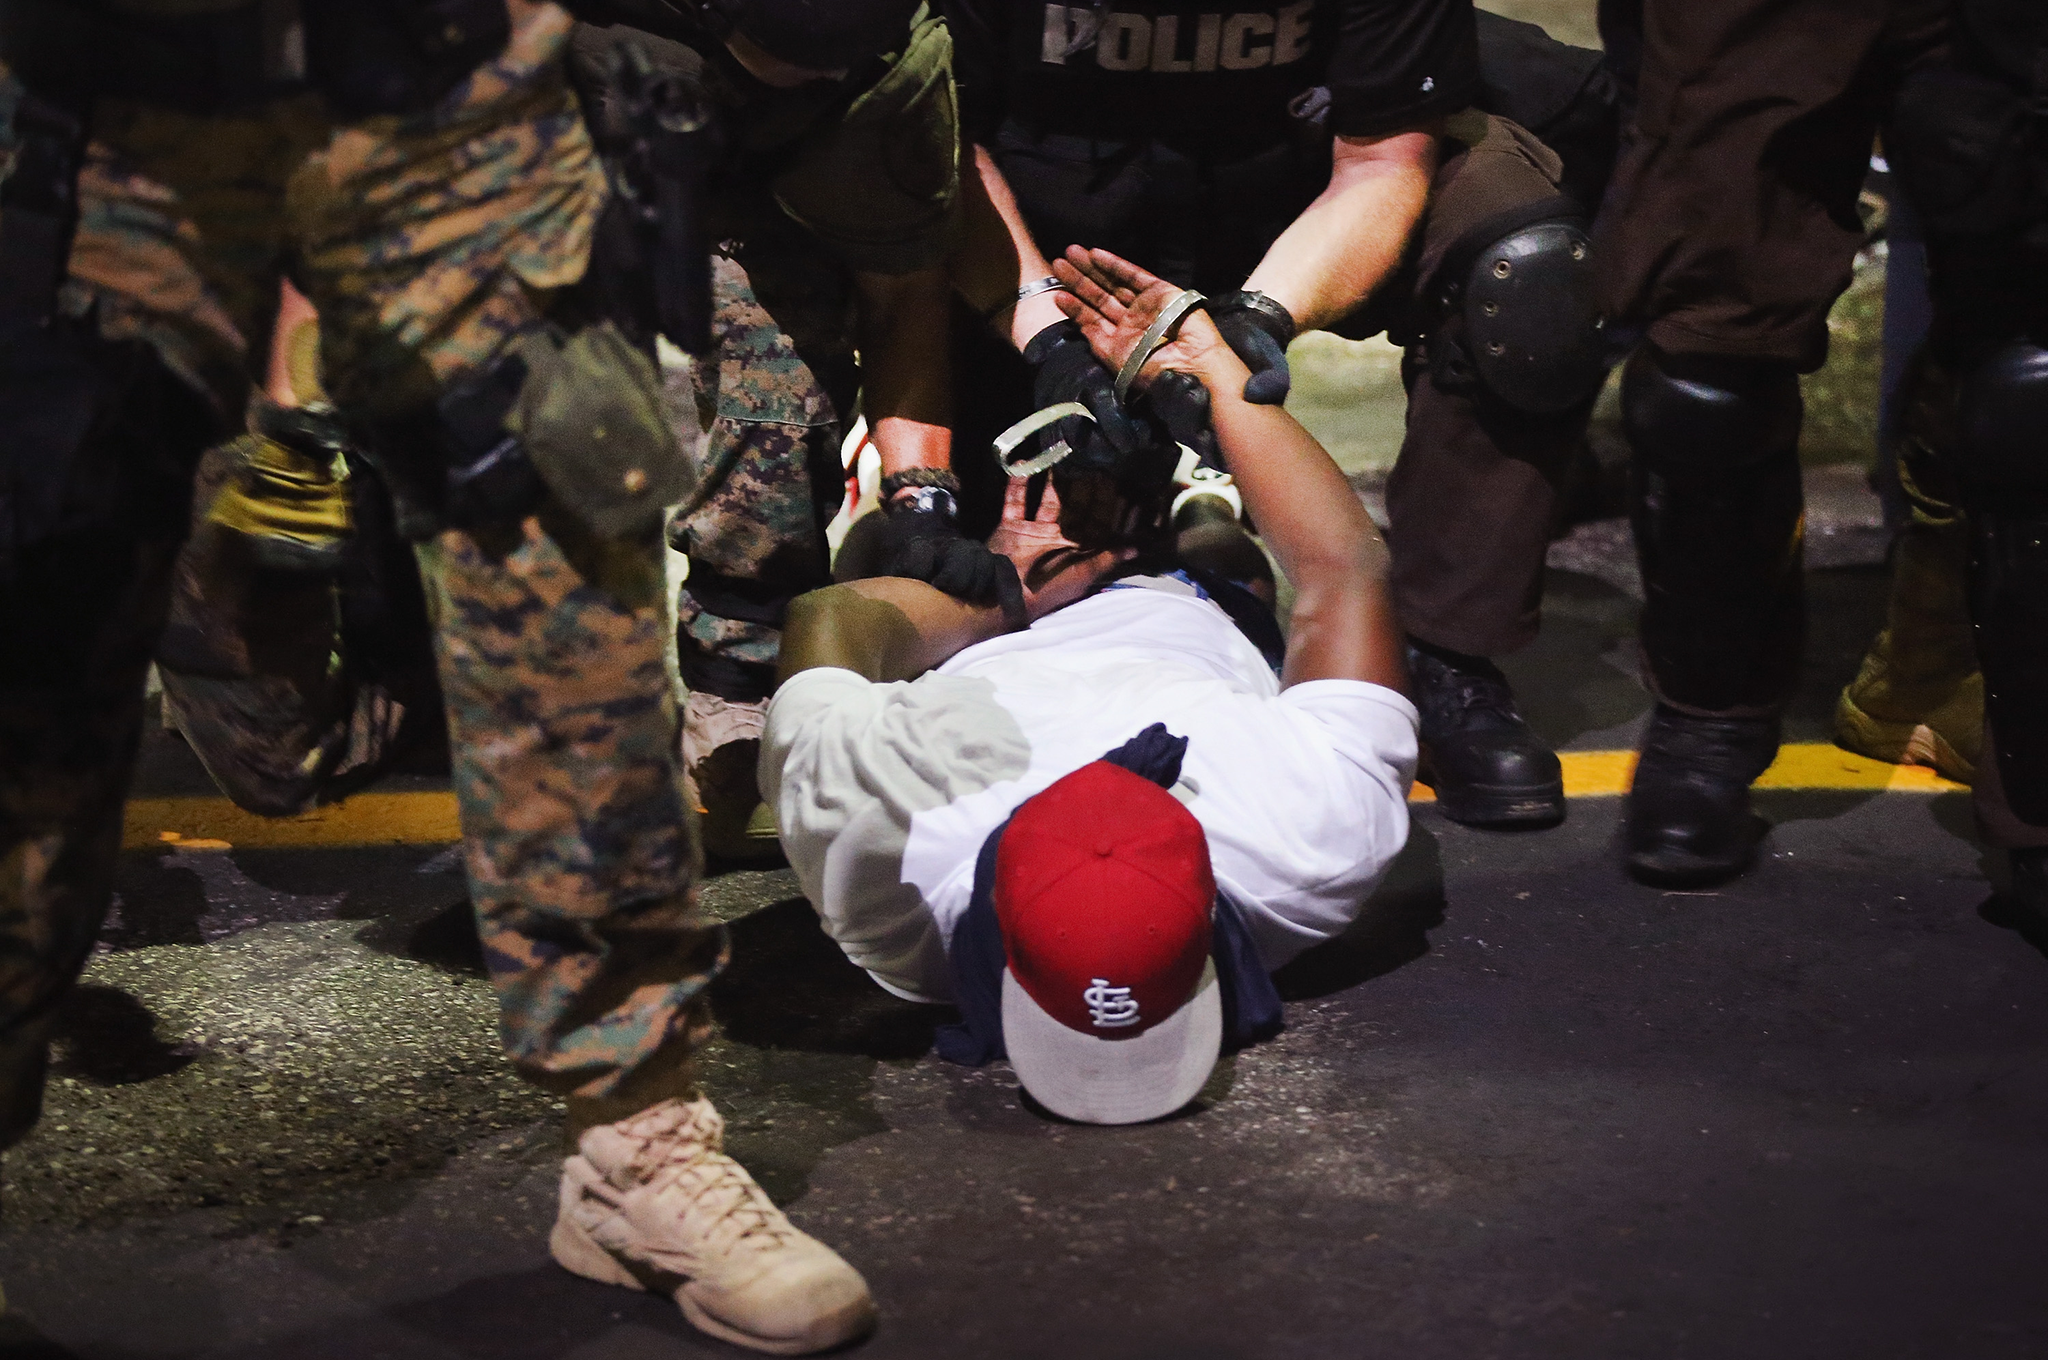 Police arrest a demonstrator protesting the killing of teenager Michael Brown in Ferguson, Missouri